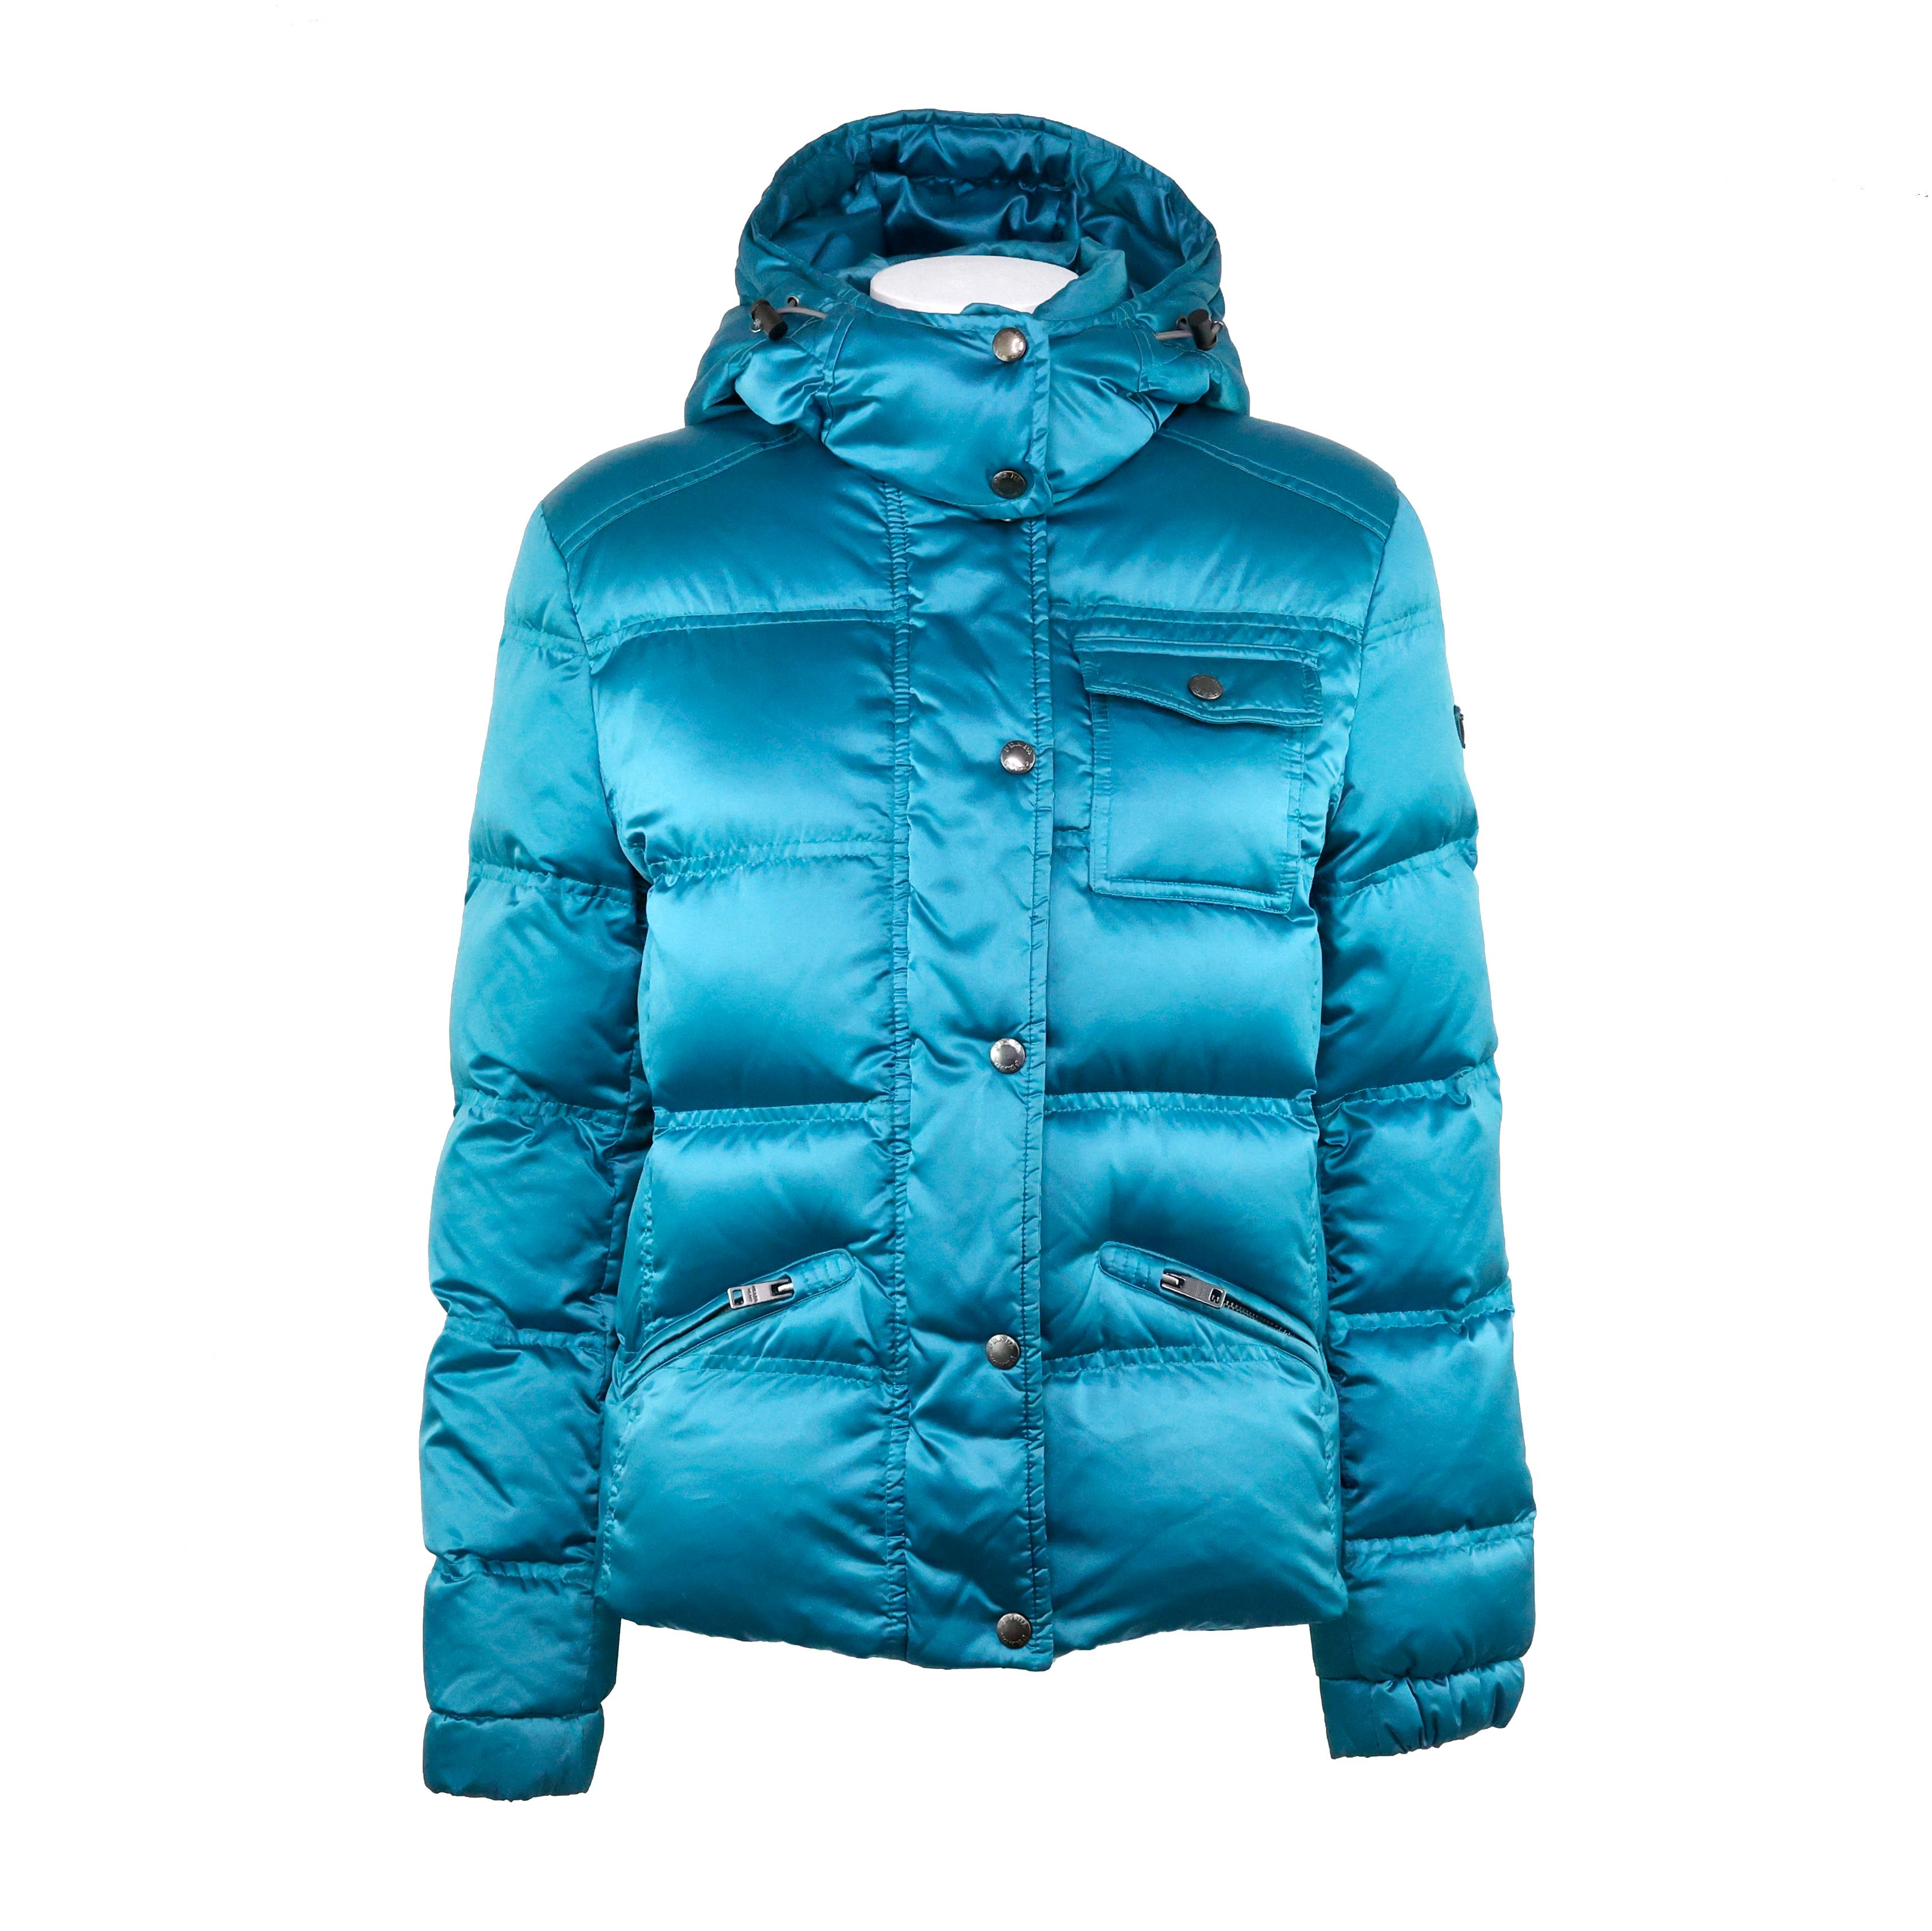 Prada Triangle Logo Puffer Jacket in Turquoise Satin For Sale 8